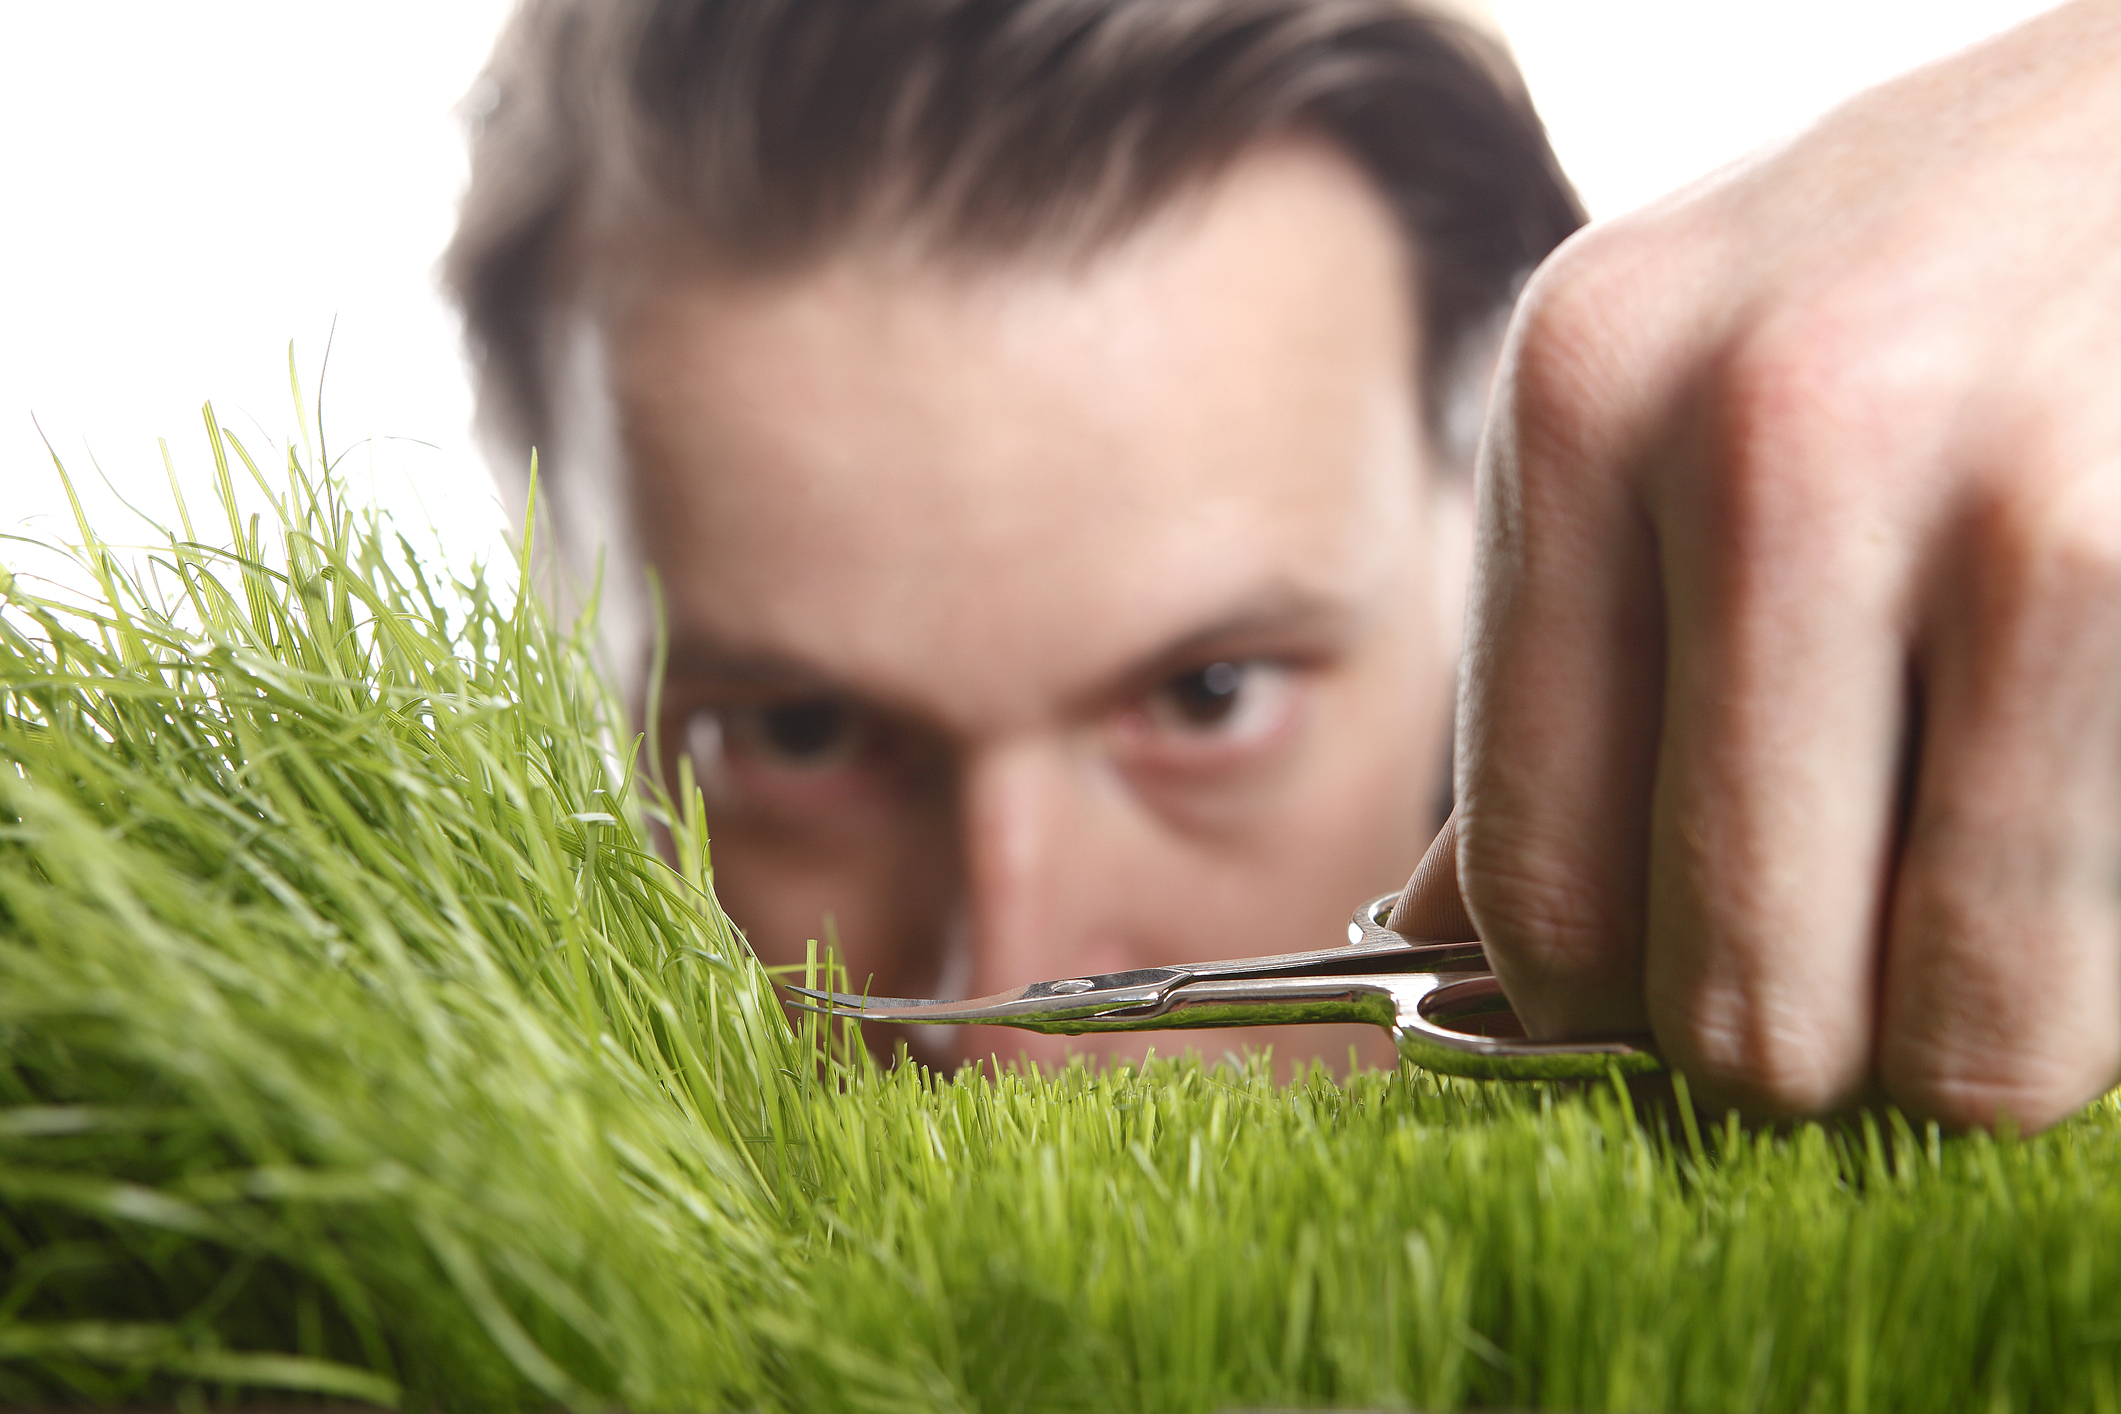 Commercial landscape provider U.S. Lawns switches solely to hand cutting grass